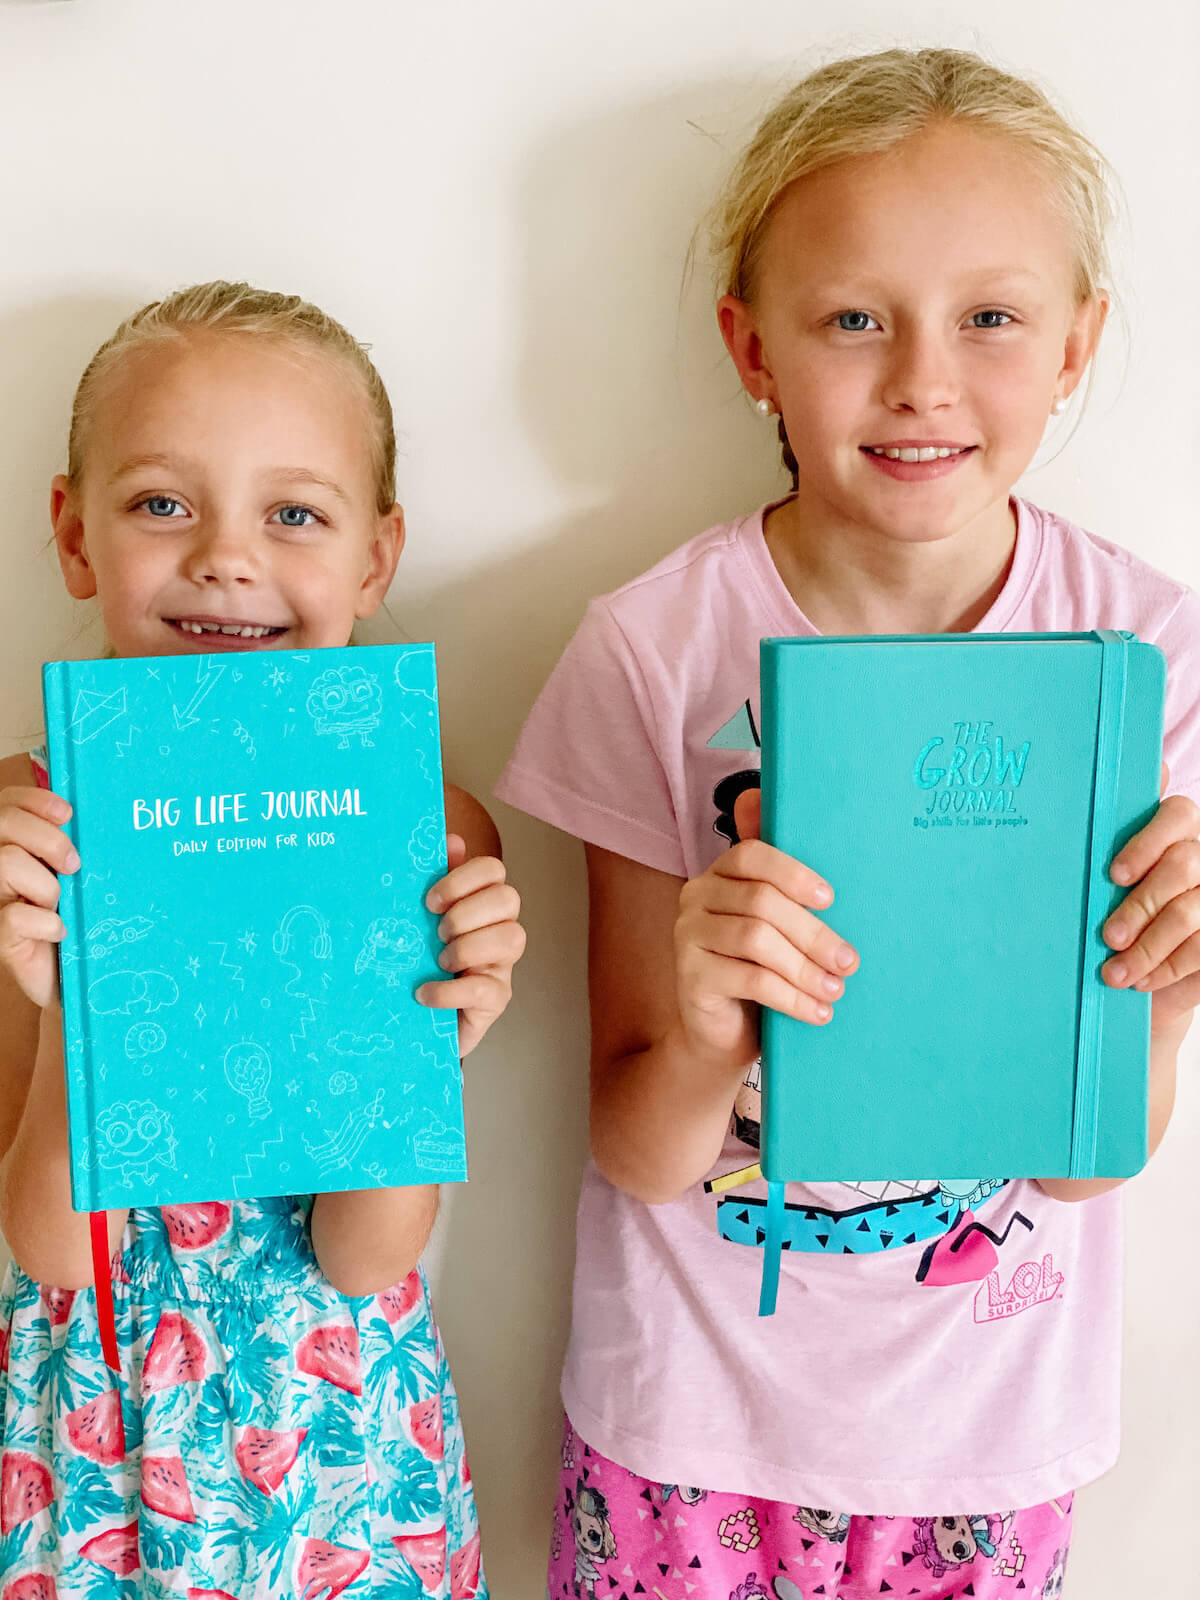 kids holding their gratitude journals up with big life journal daily and the grow journal